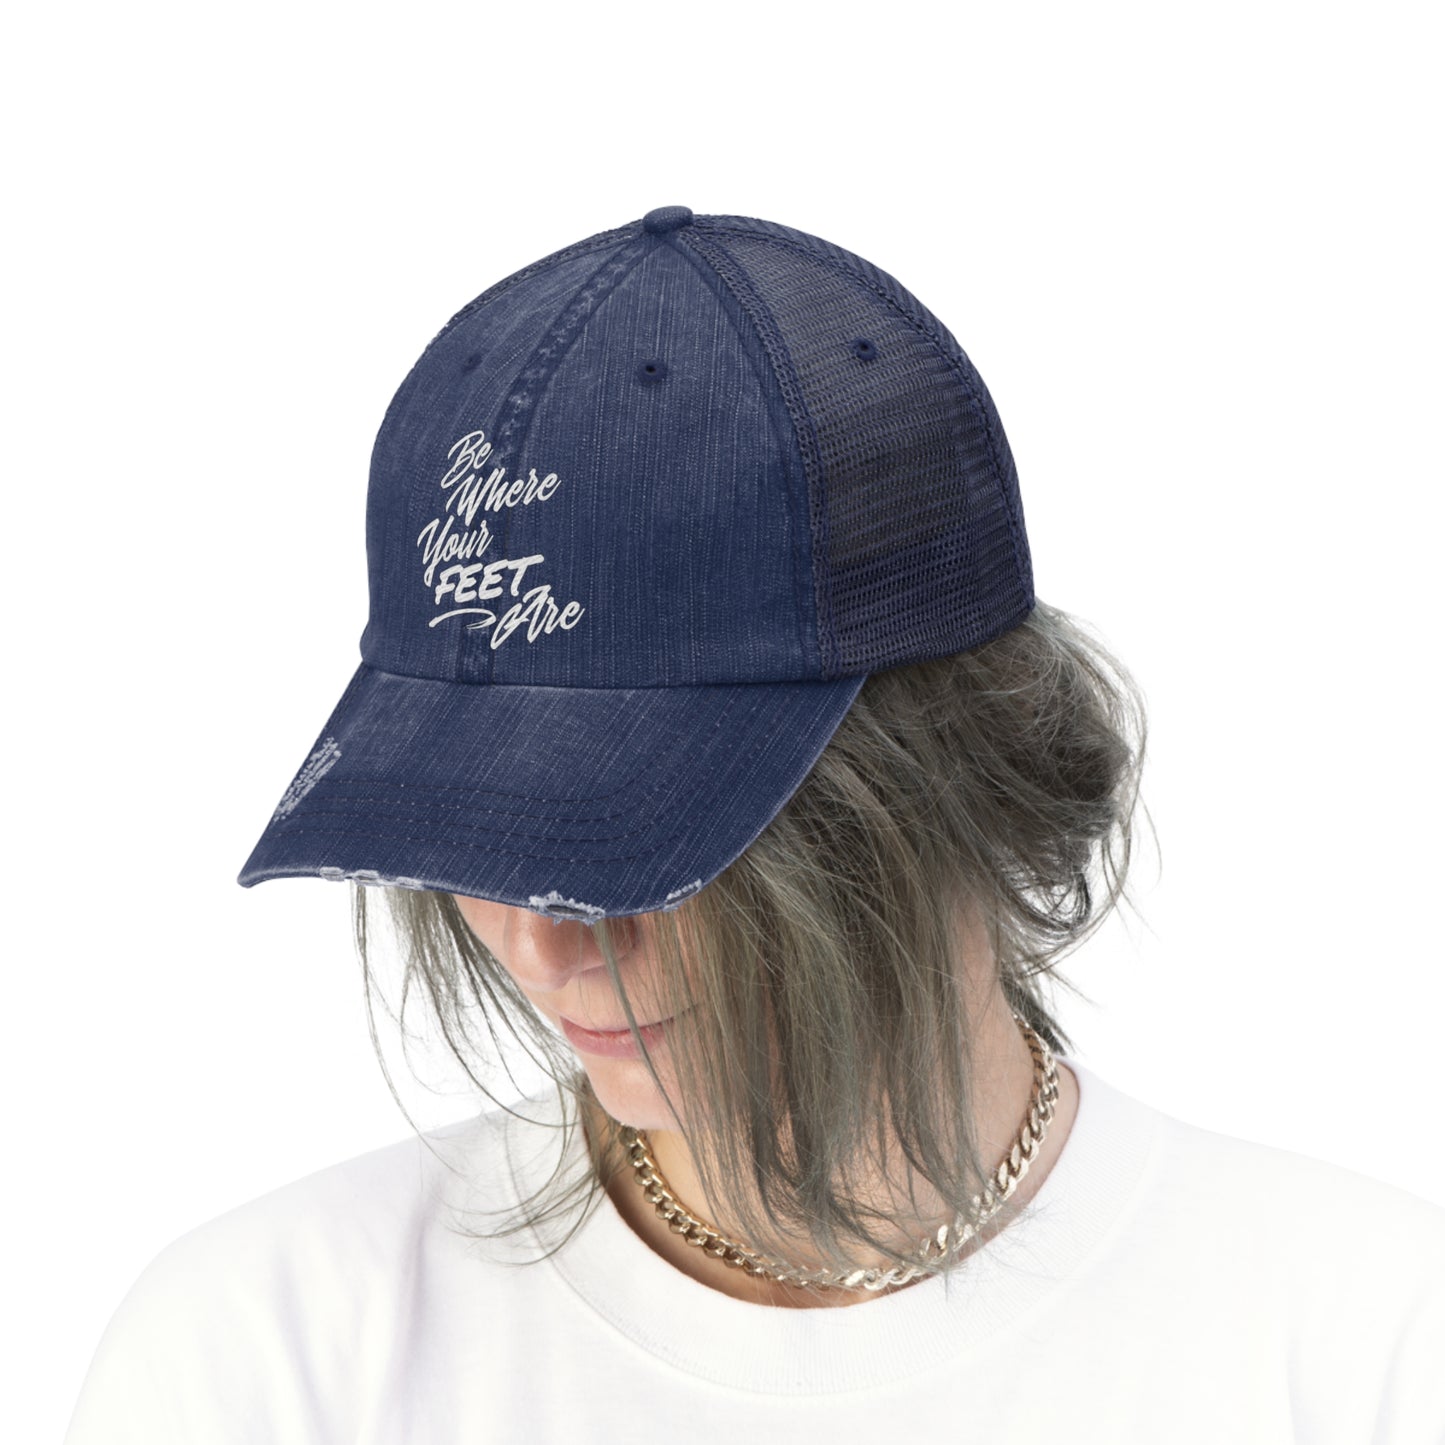 Be Where Your Feet Are Unisex Trucker Hat